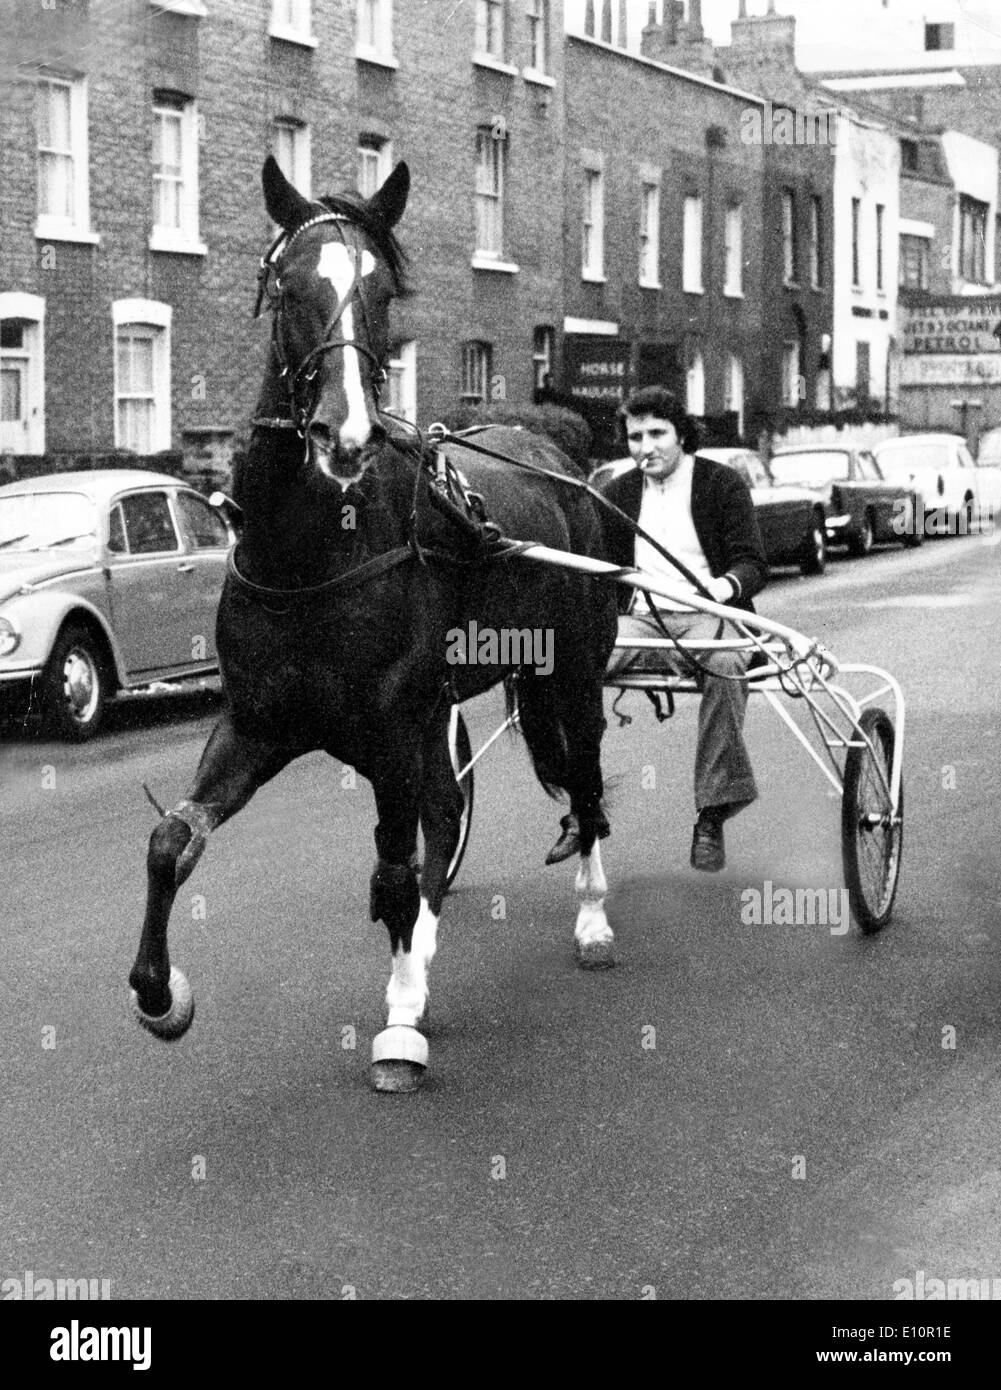 1973 oil crisis - Alternate ways of transport - a man in a racing sulky drawn by a horse Stock Photo